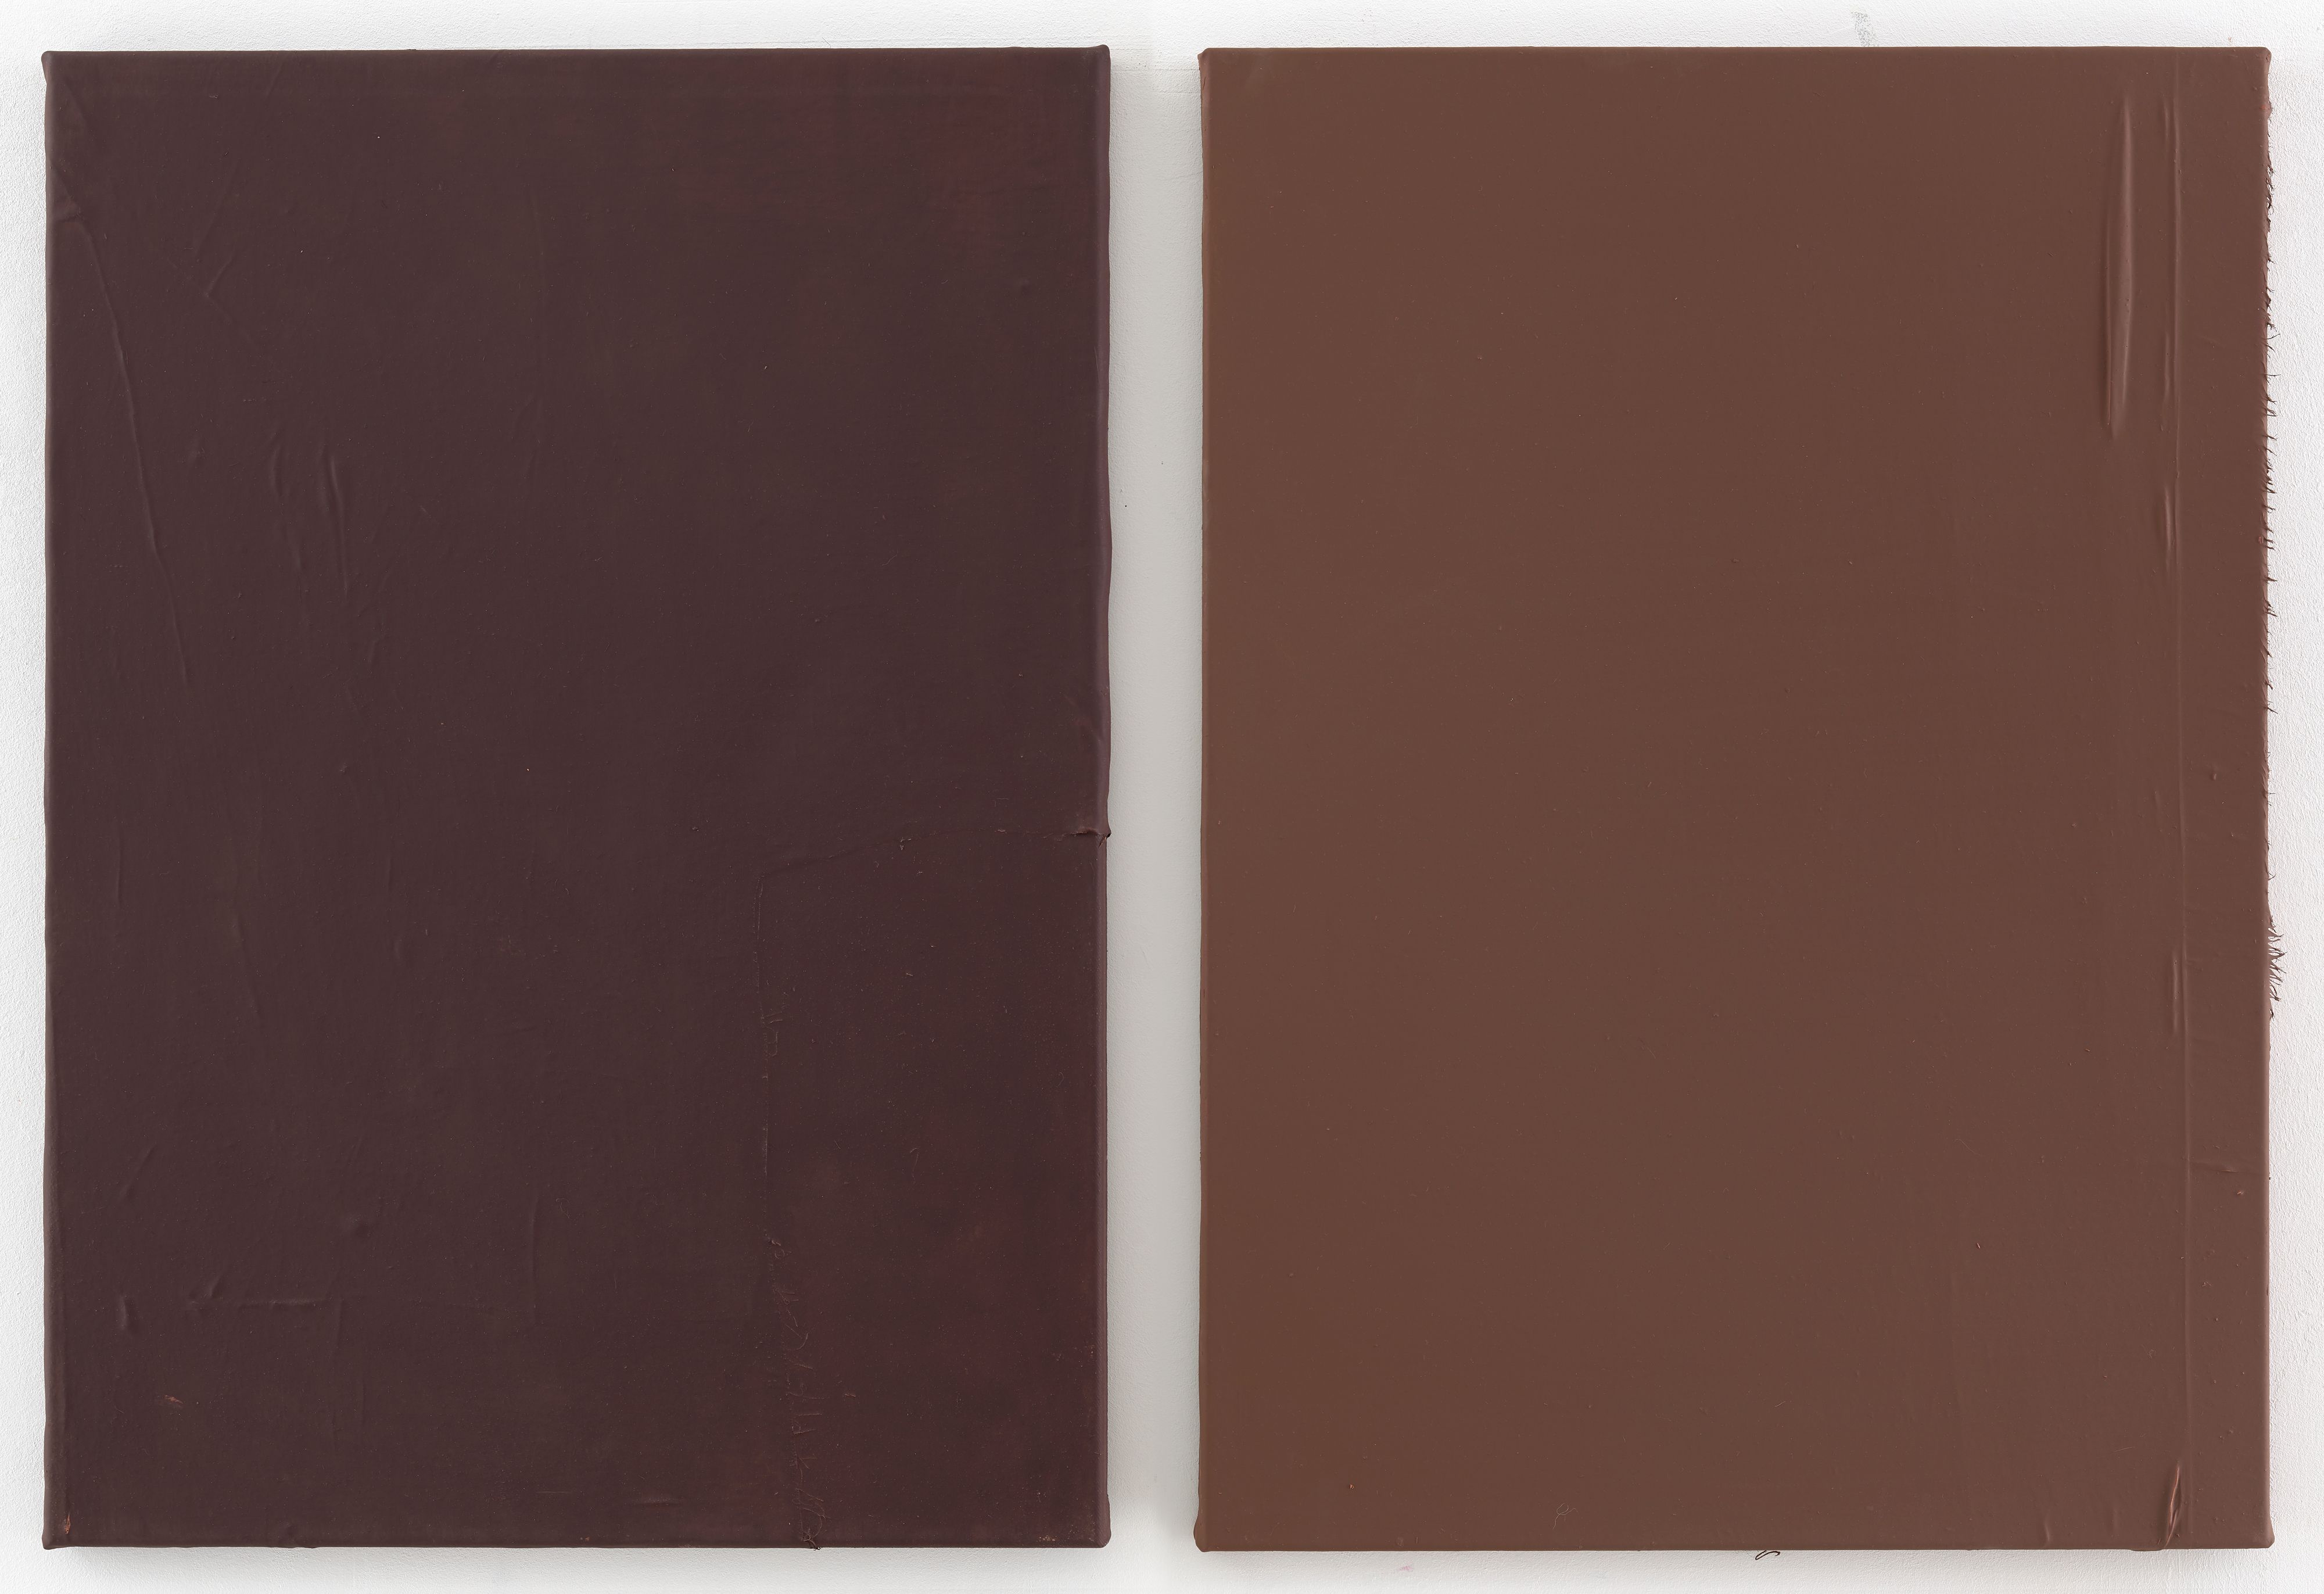 Two rectangular canvases in different solid shades of brown